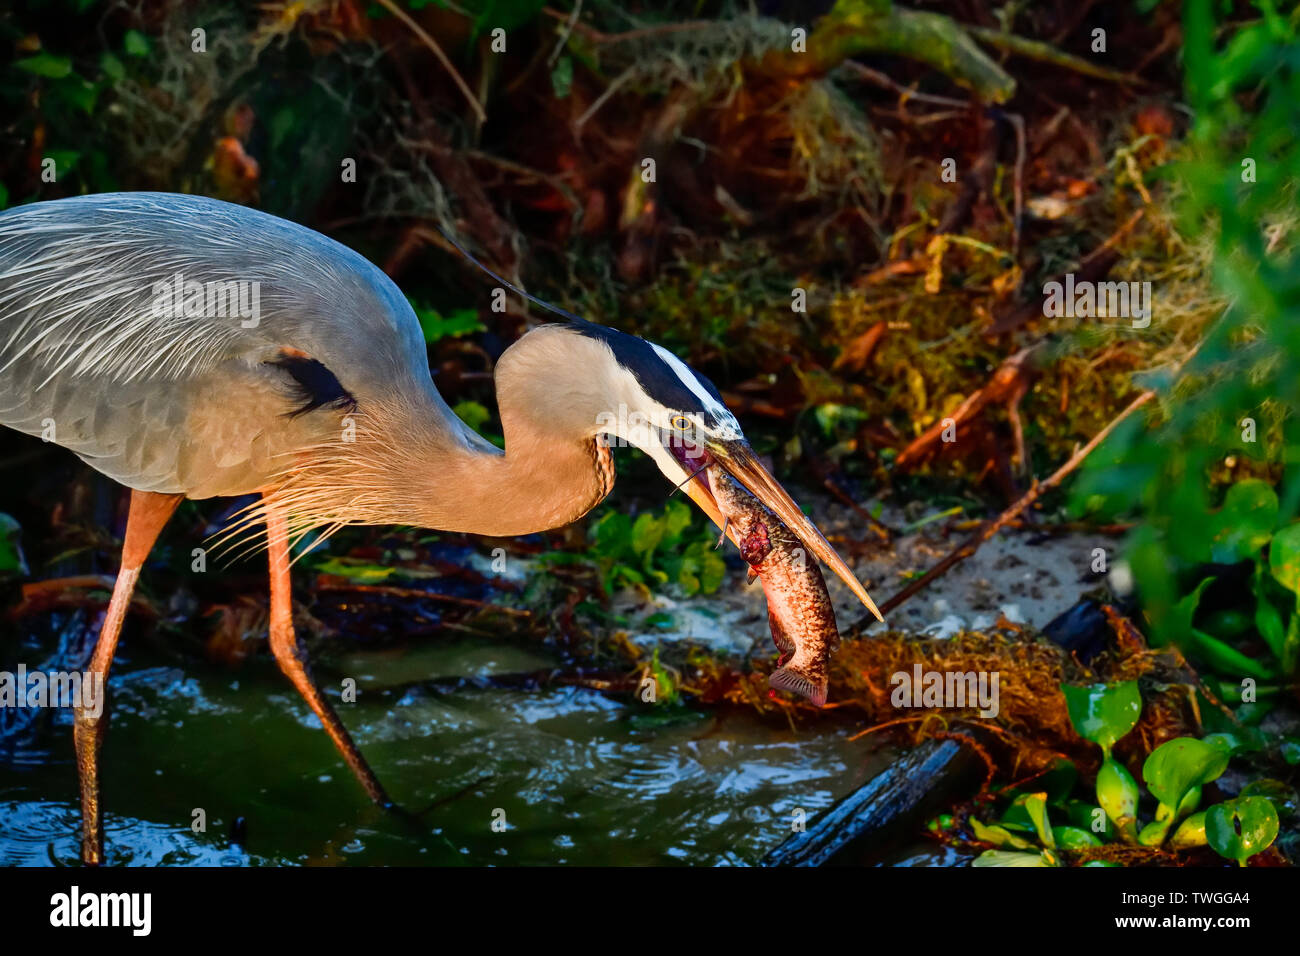 Early bird catches...a fish for breakfast. Stock Photo